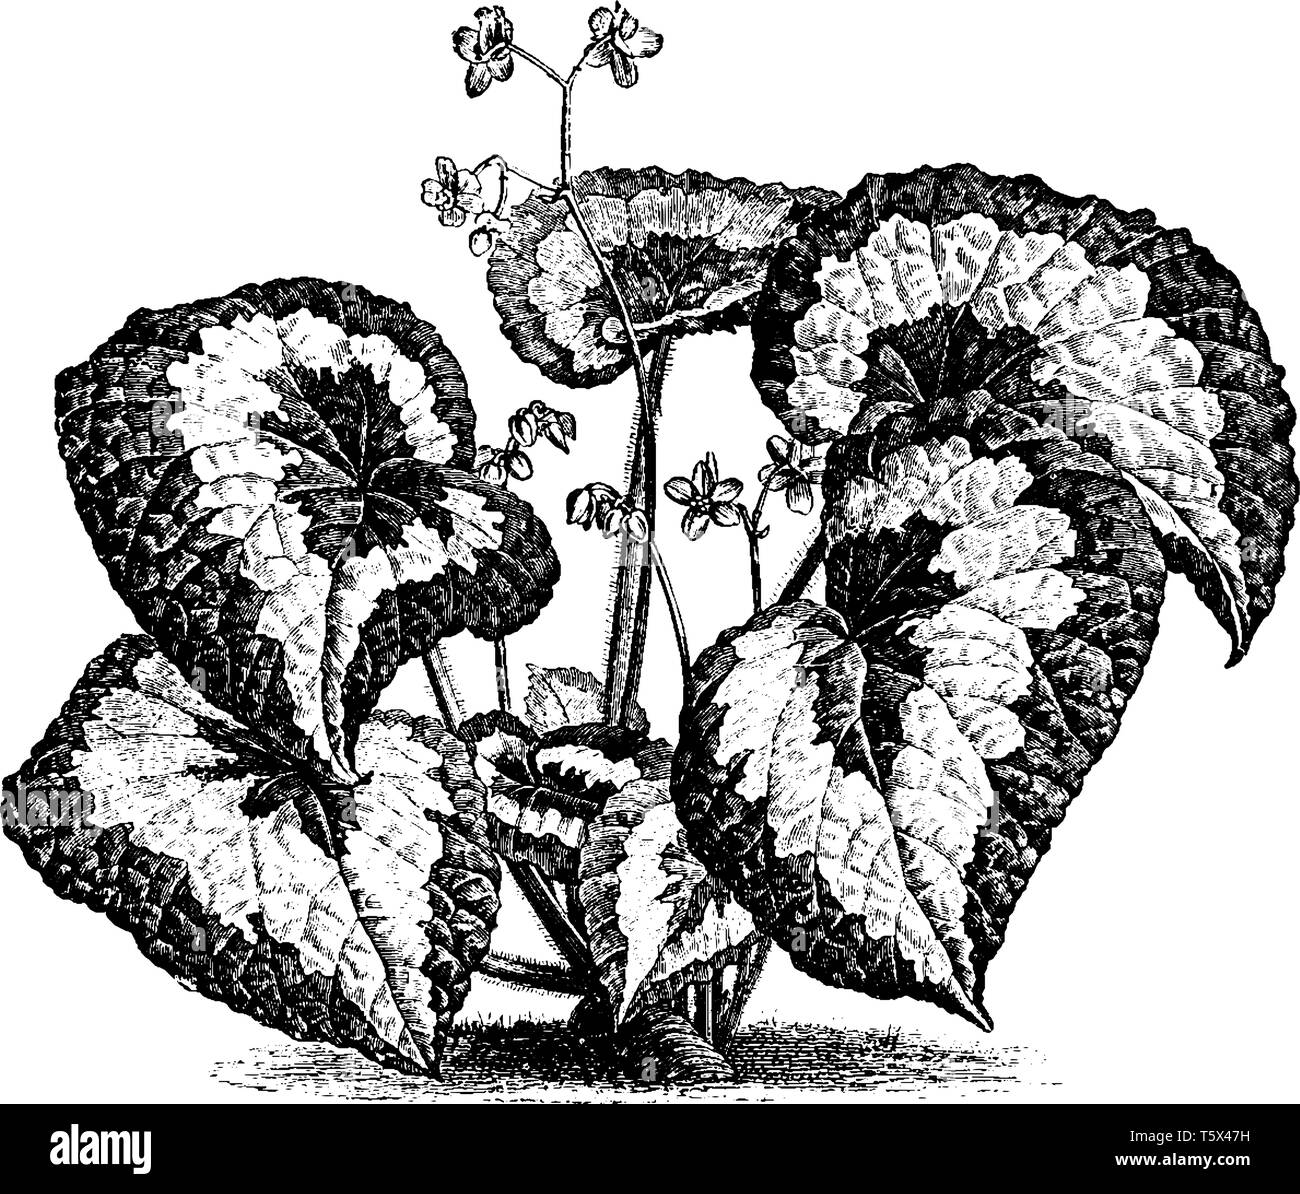 The Begonia Rex is showy plant. A leaf comes in many colors and flowers are tiny in size. The leaves stalks are hairy, vintage line drawing or engravi Stock Vector